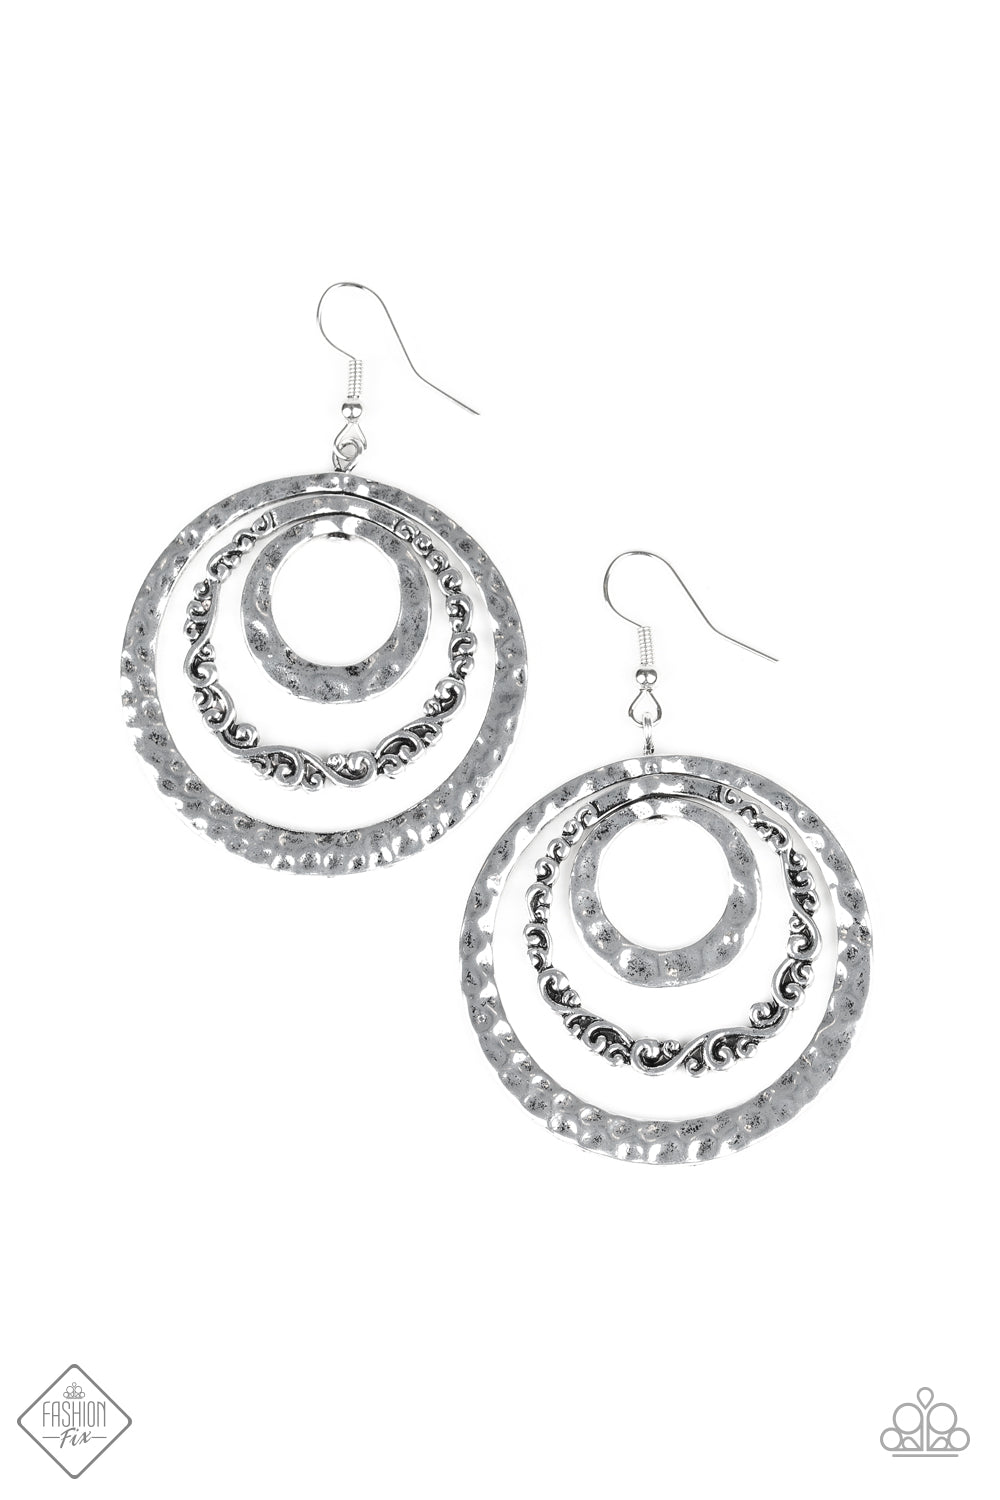 Paparazzi Out Of Control Shimmer Silver Fishhook Earrings  - Fashion Fix Glimpses of Malibu December 2019